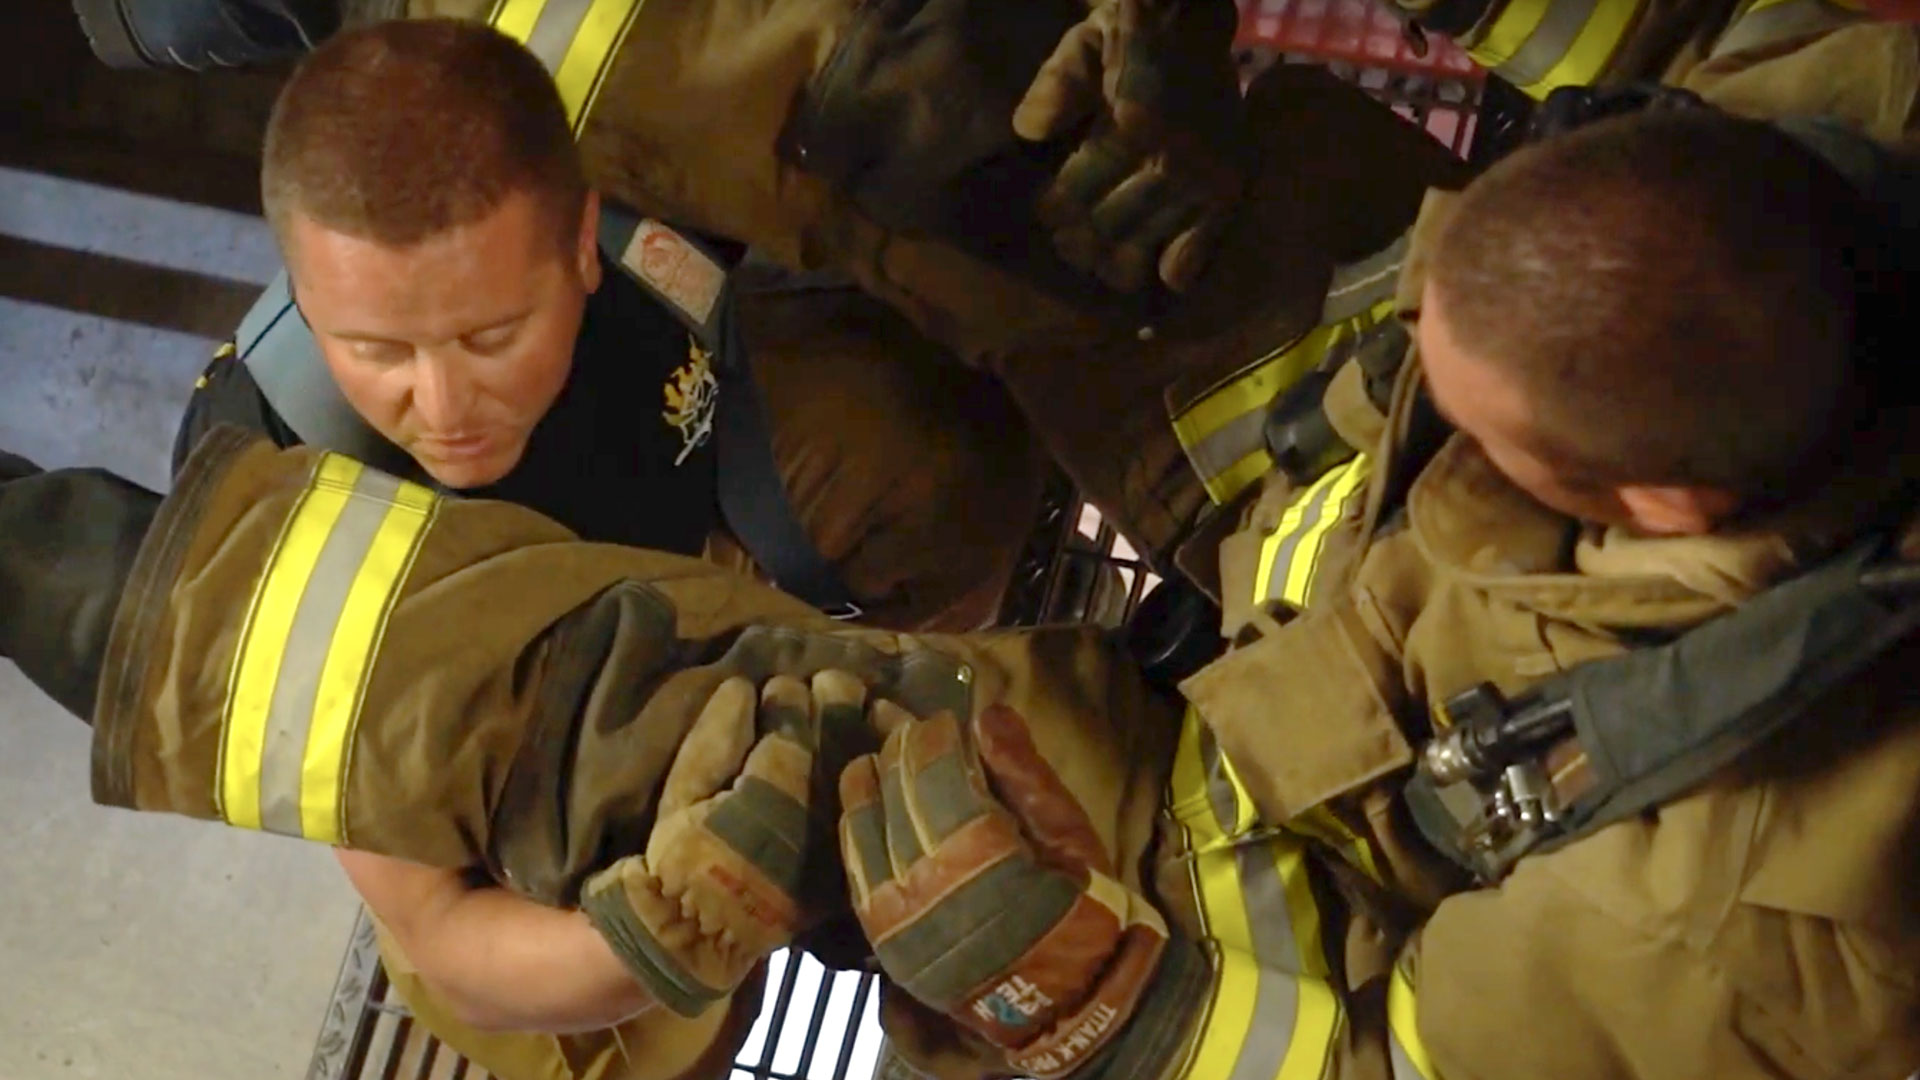 Featured image for “Pregnant Lady Lift | Two-Firefighter Rapid Intervention Stairwell Rescue”